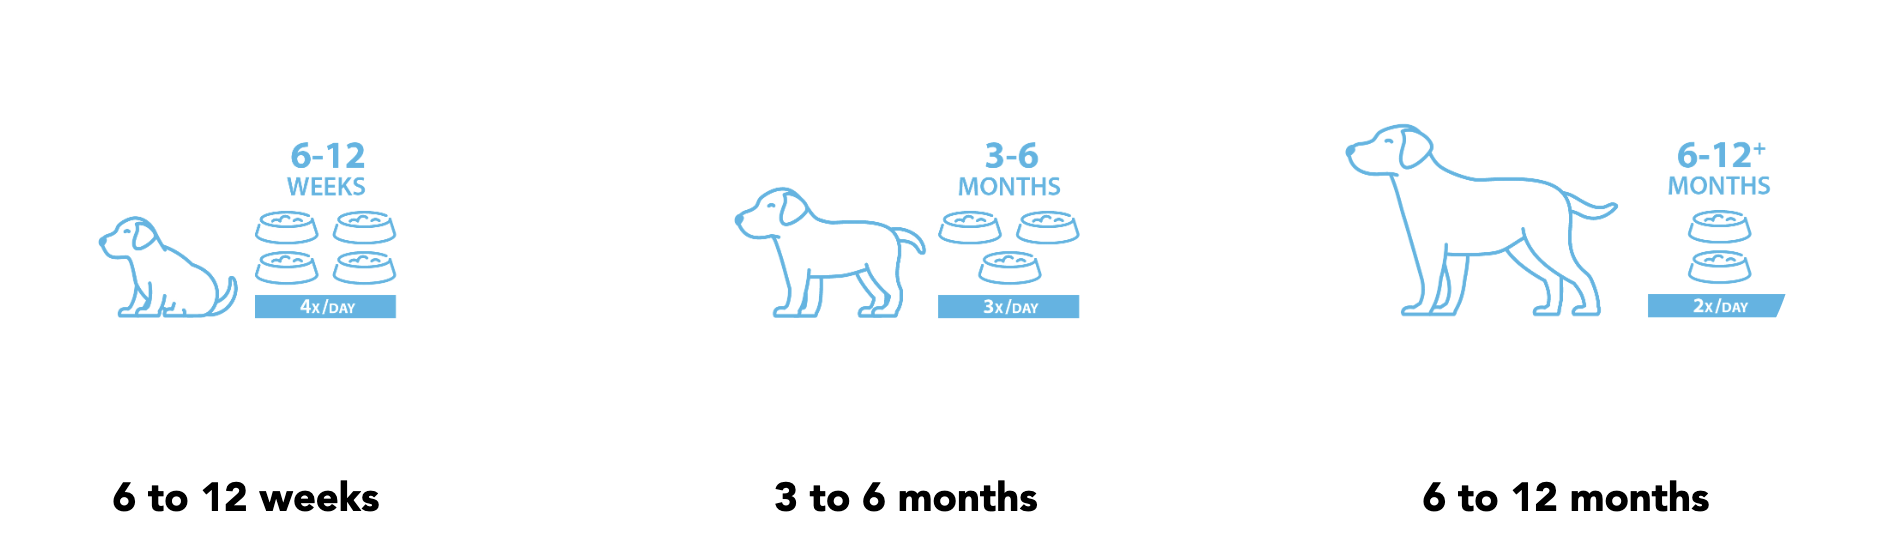 https://www.justfoodfordogs.com/on/demandware.static/-/Library-Sites-JustFoodForDogsSharedLibrary/default/dw2f9bc817/Screenshot%202023-06-29%20at%203.06.43%20PM.png